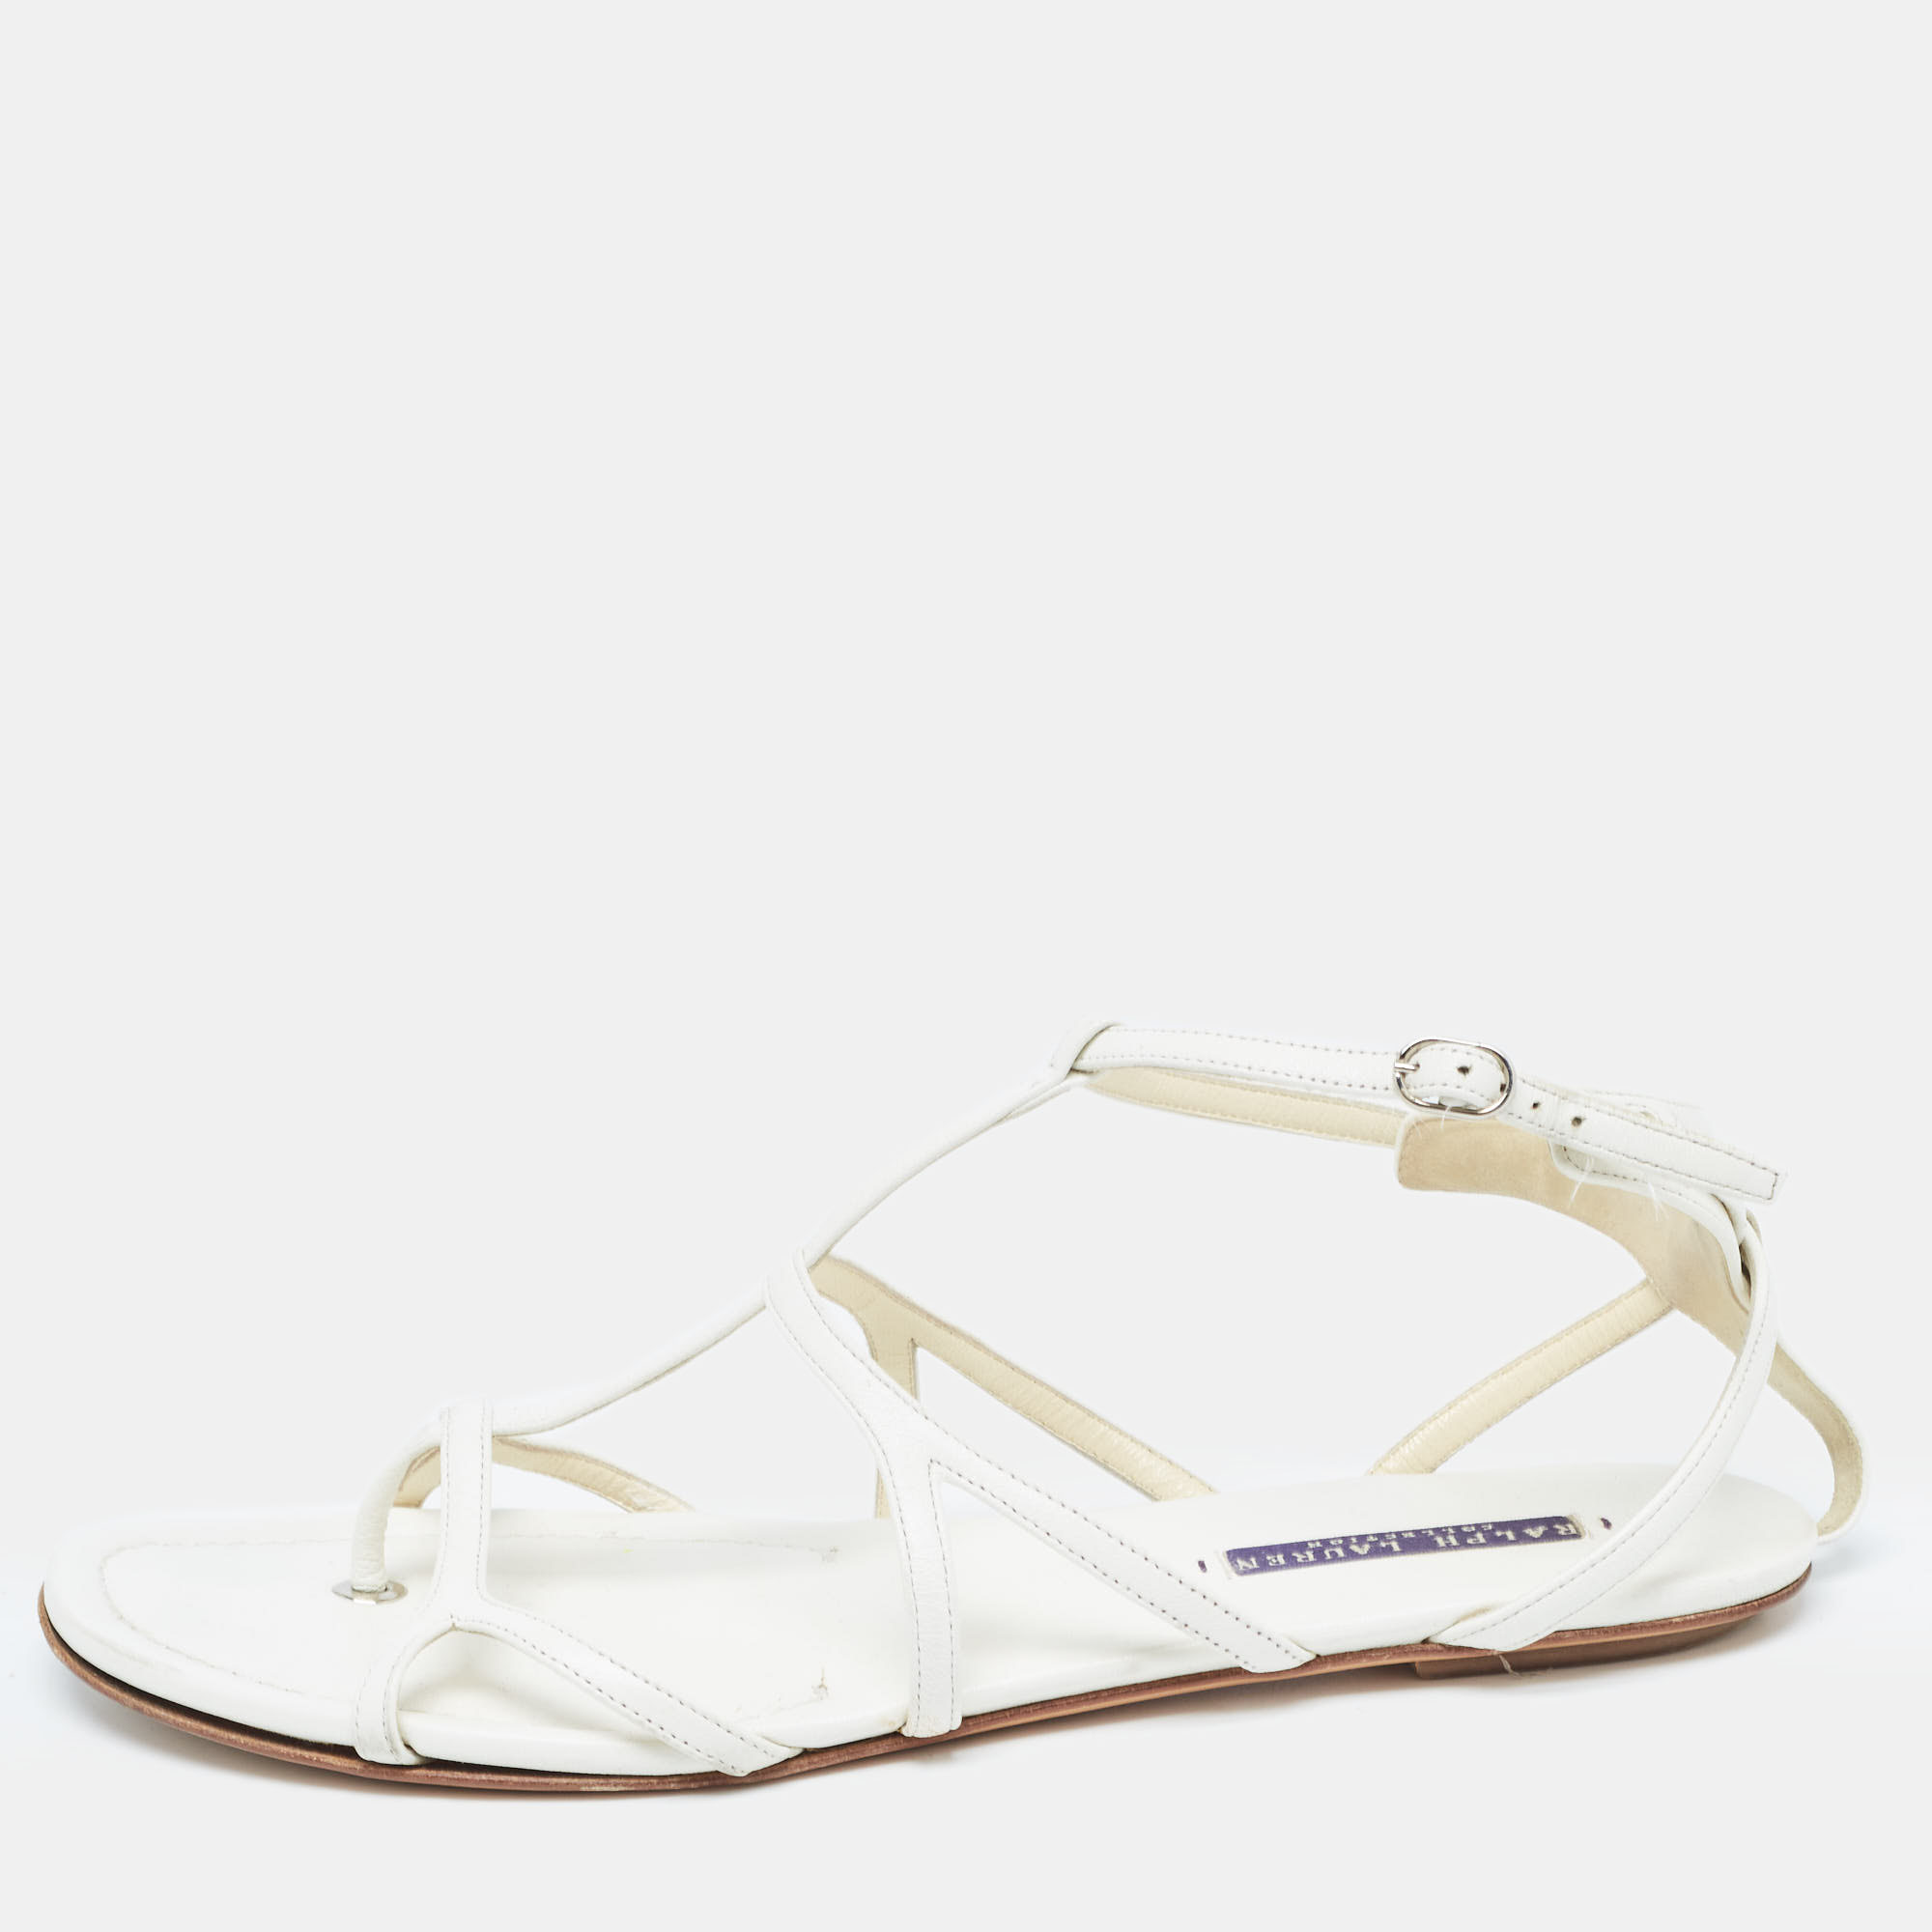 Ralph lauren collection white leather thong strappy flat sandals size 41